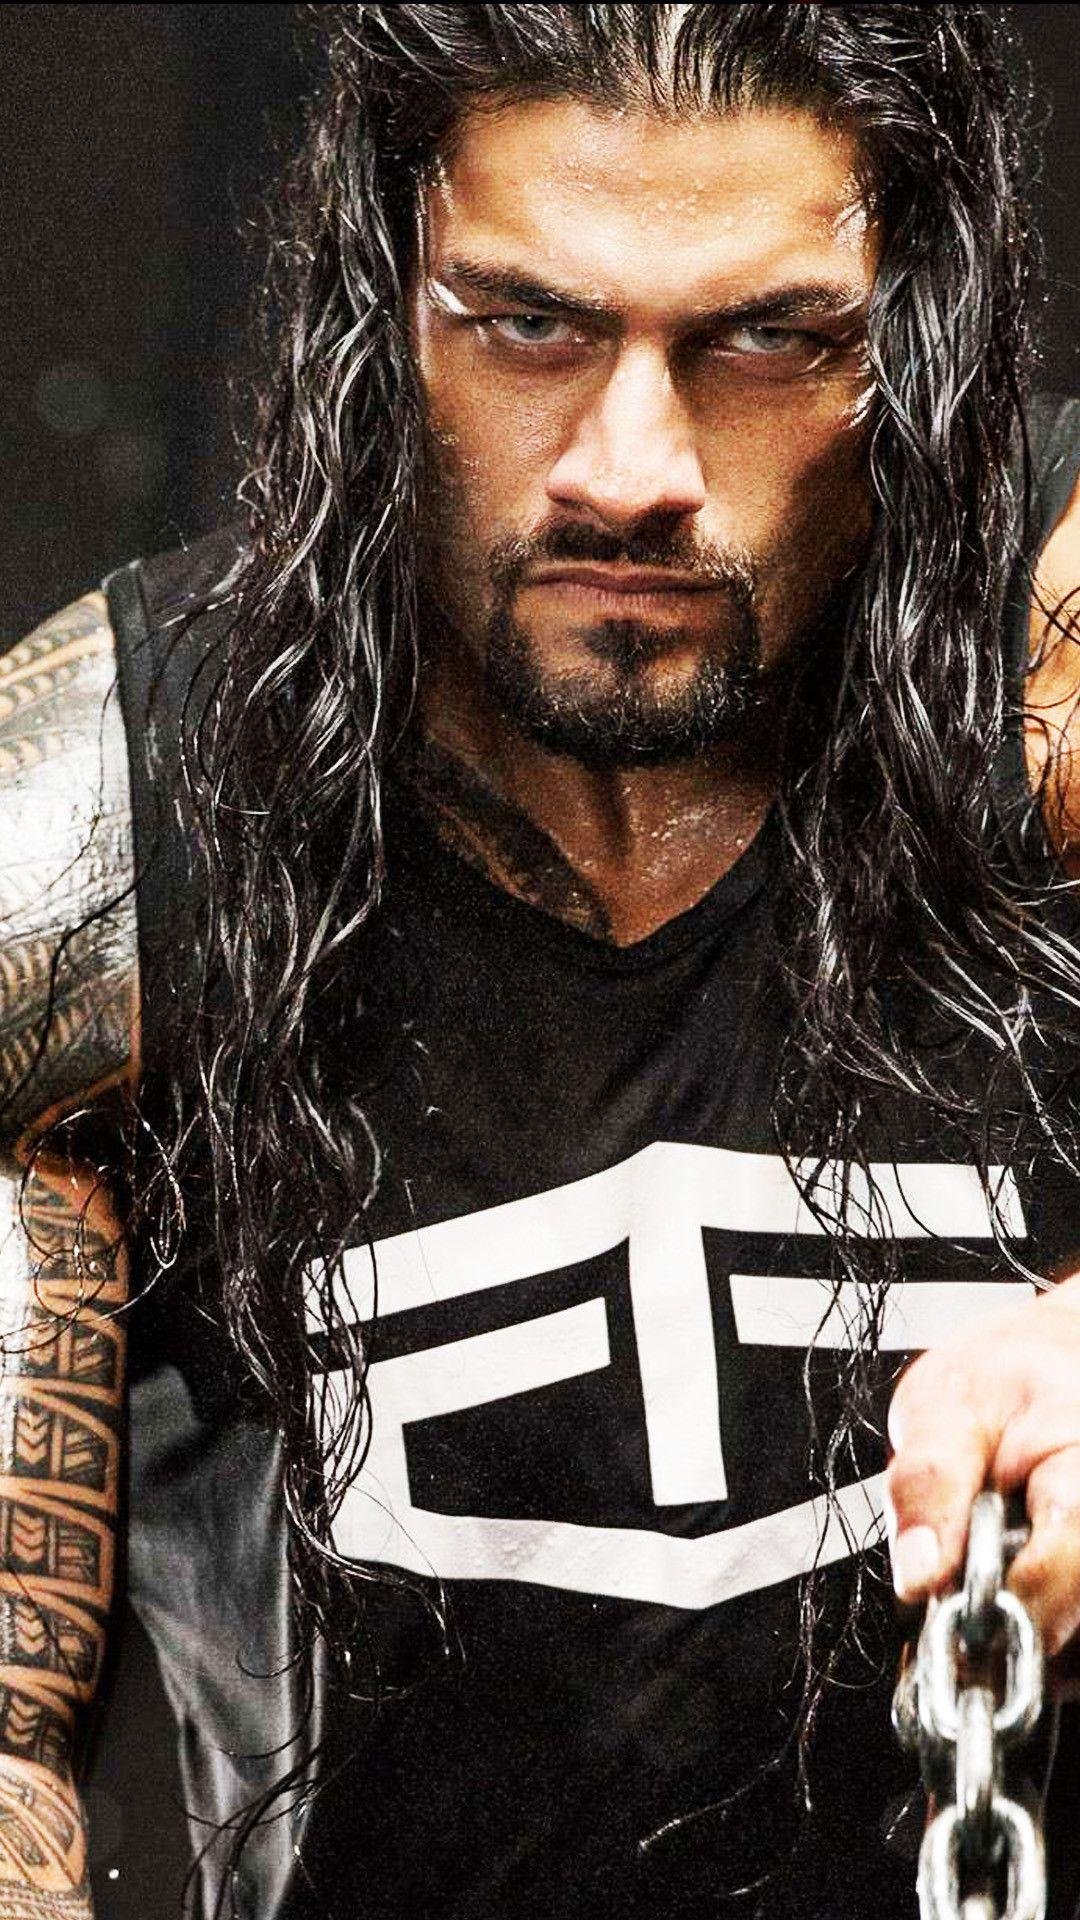 Roman Reigns With Championship Belt Wallpaper Download | MobCup